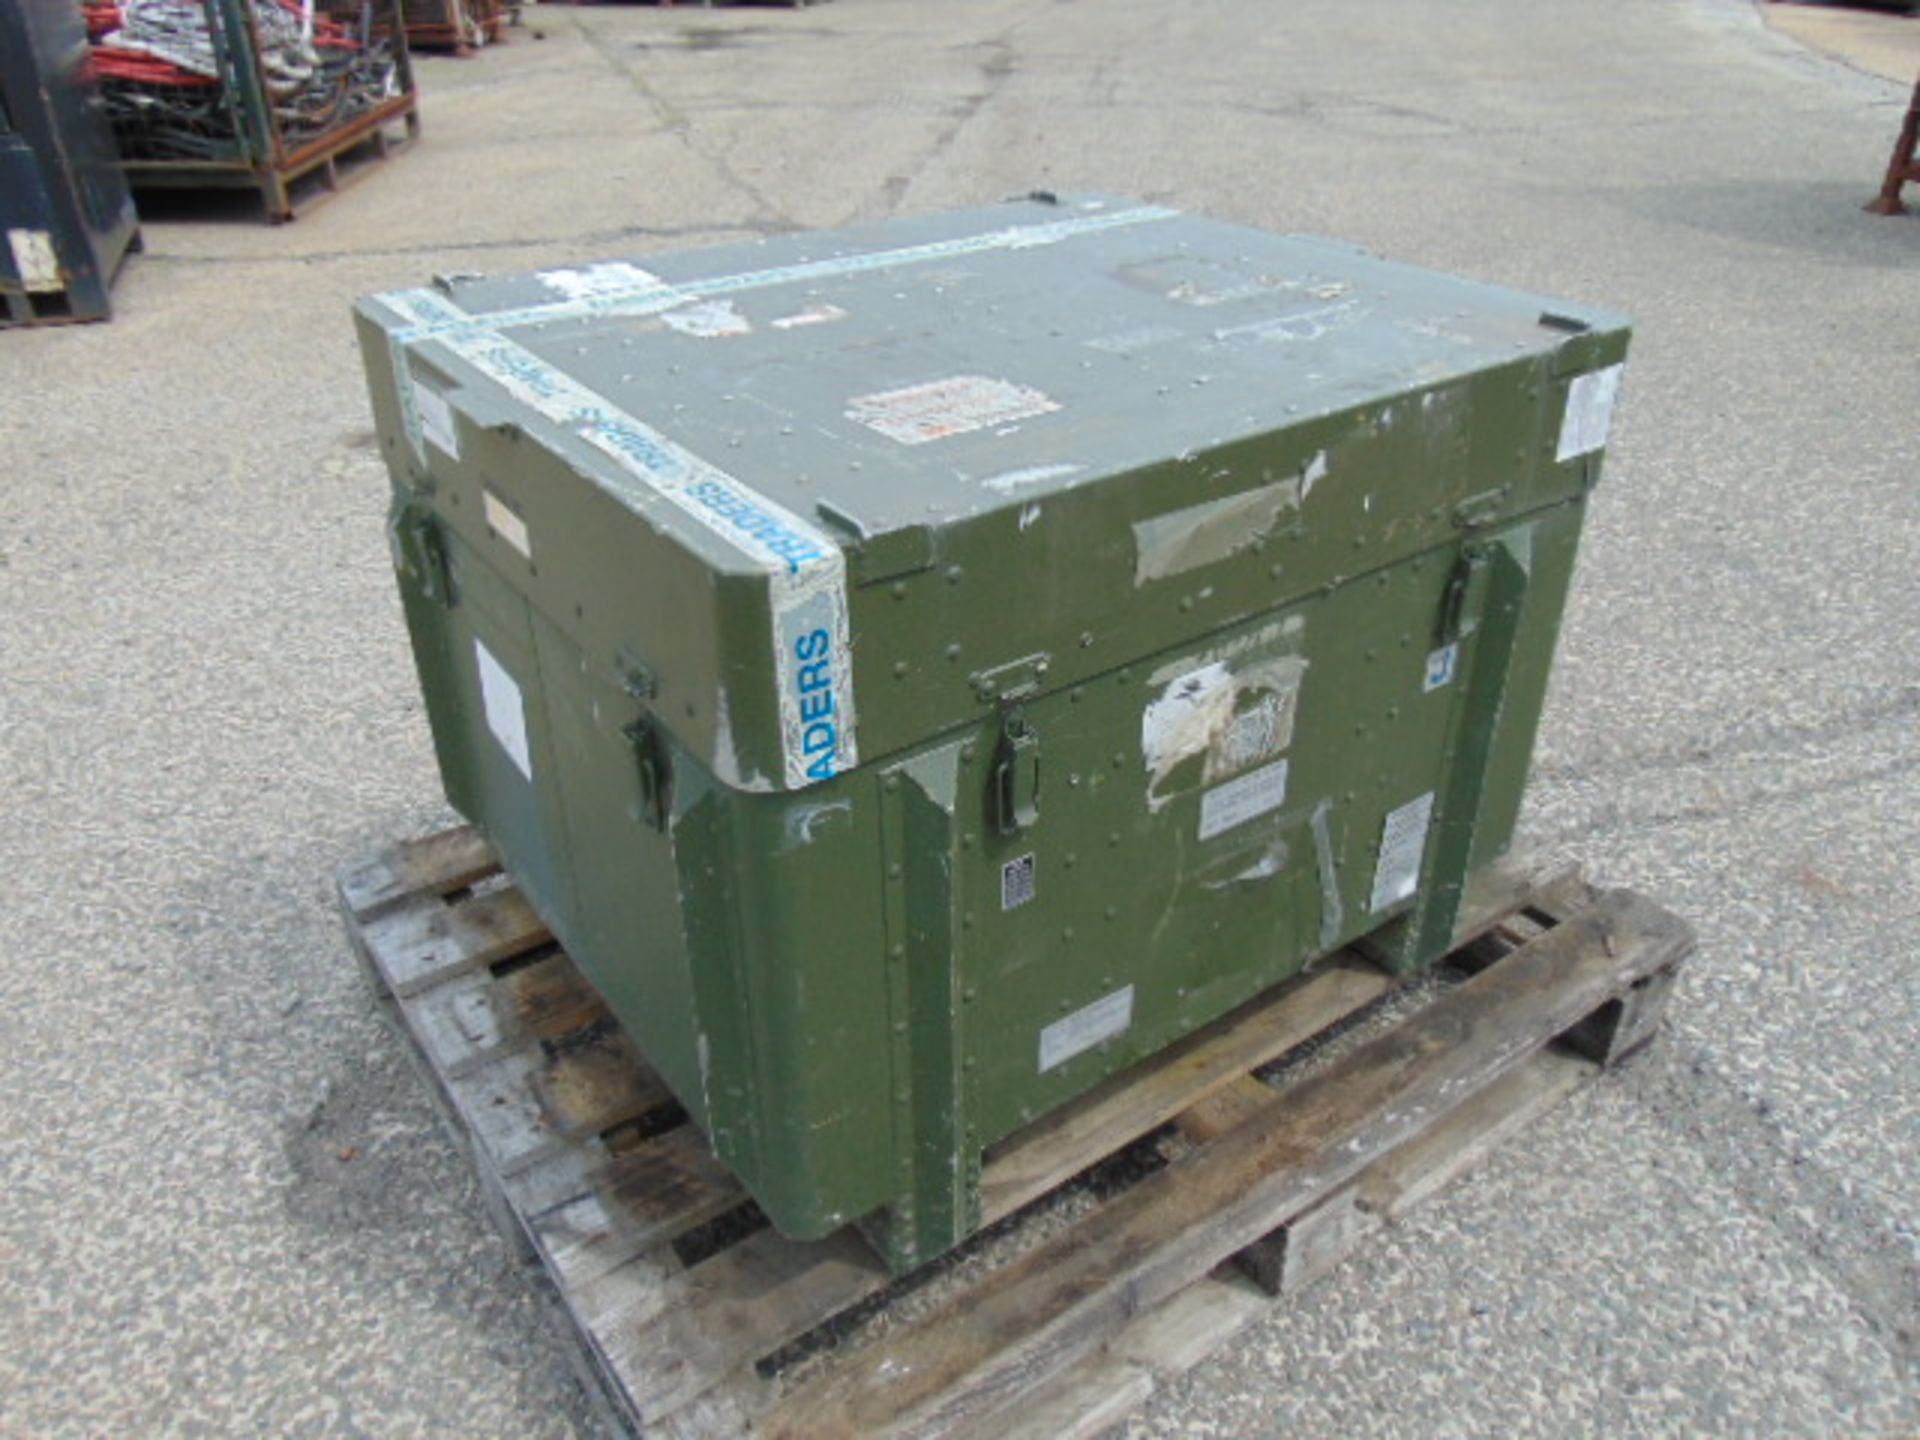 Large Heavy Duty Secure Storage Box as shown